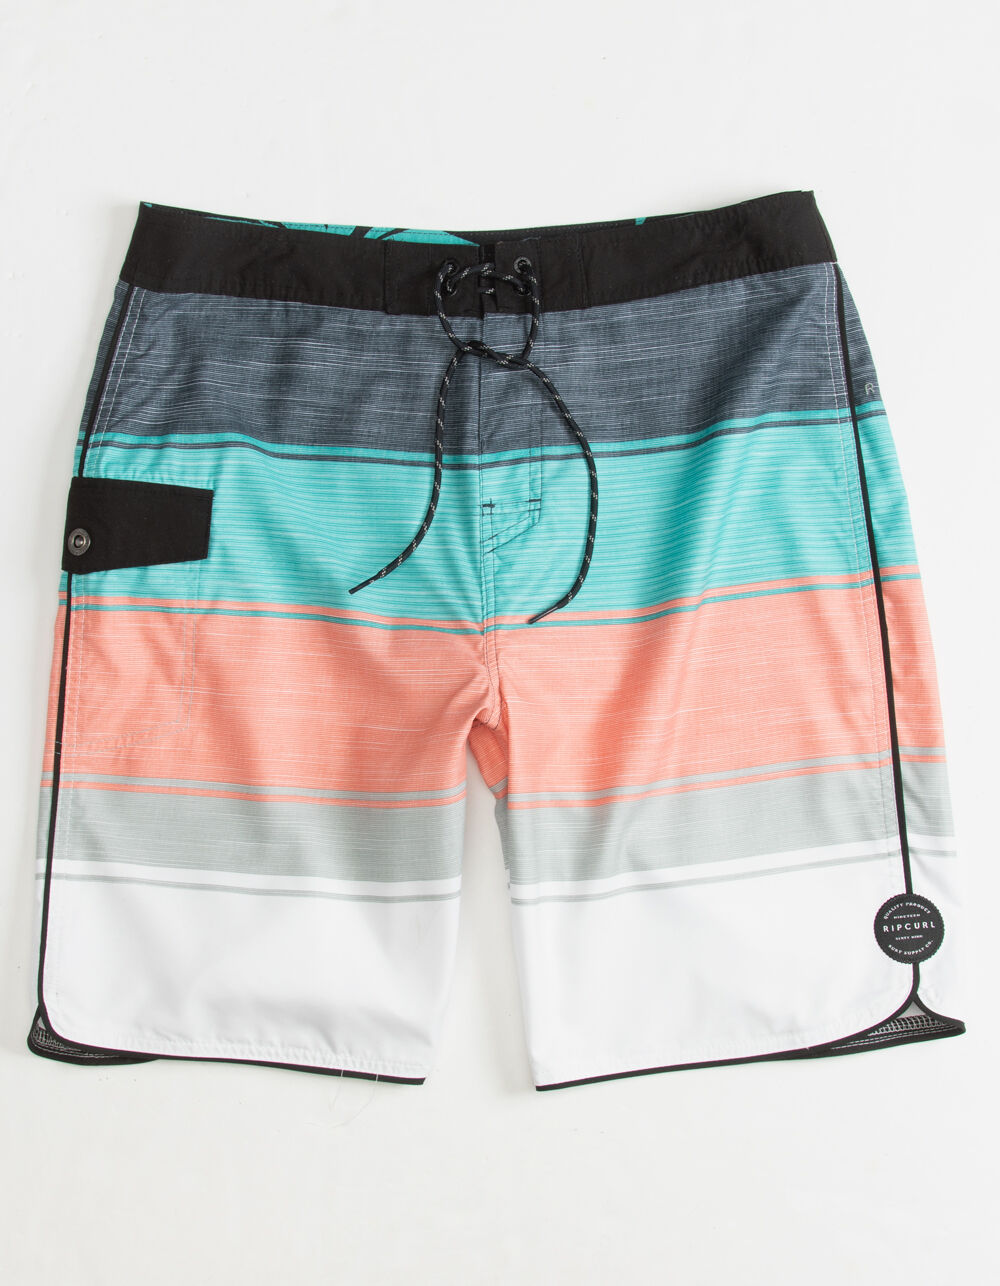 RIP CURL State Park 4.0 Mens Boardshorts - CORAL | Tillys